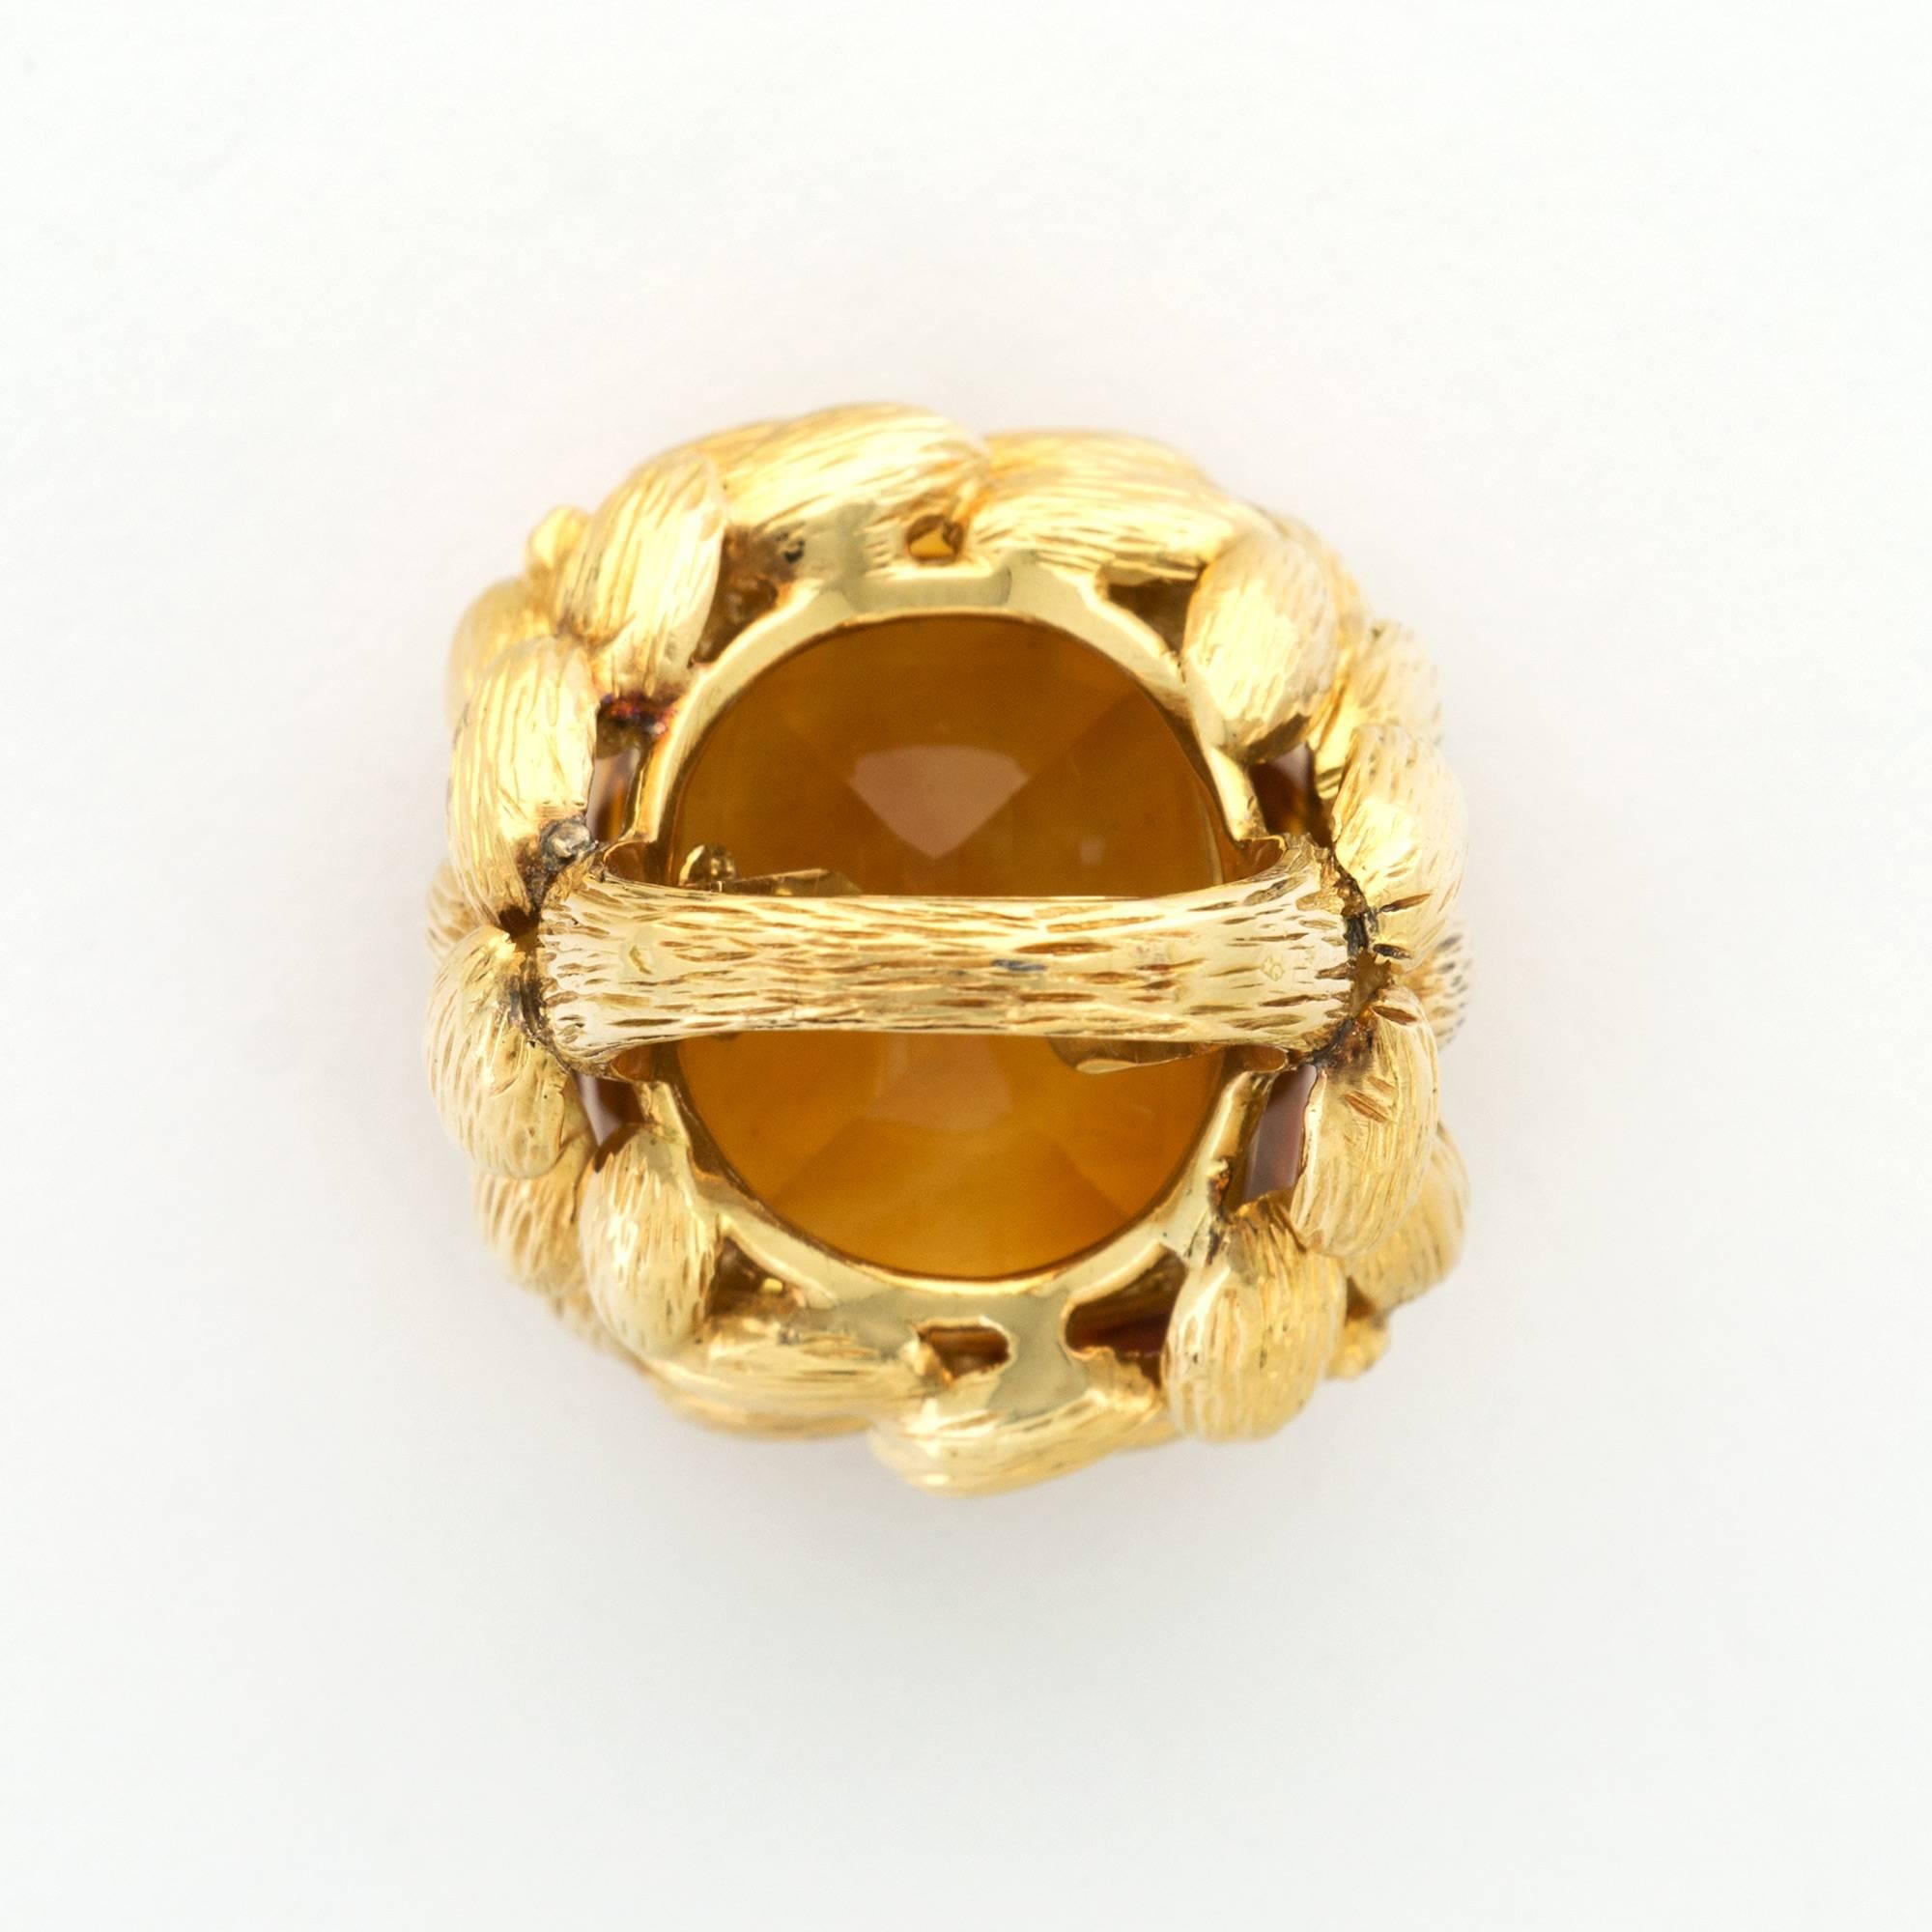 Chaumet Paris 18 Karat Yellow Gold Citrine Ring In Excellent Condition For Sale In Beverly Hills, CA